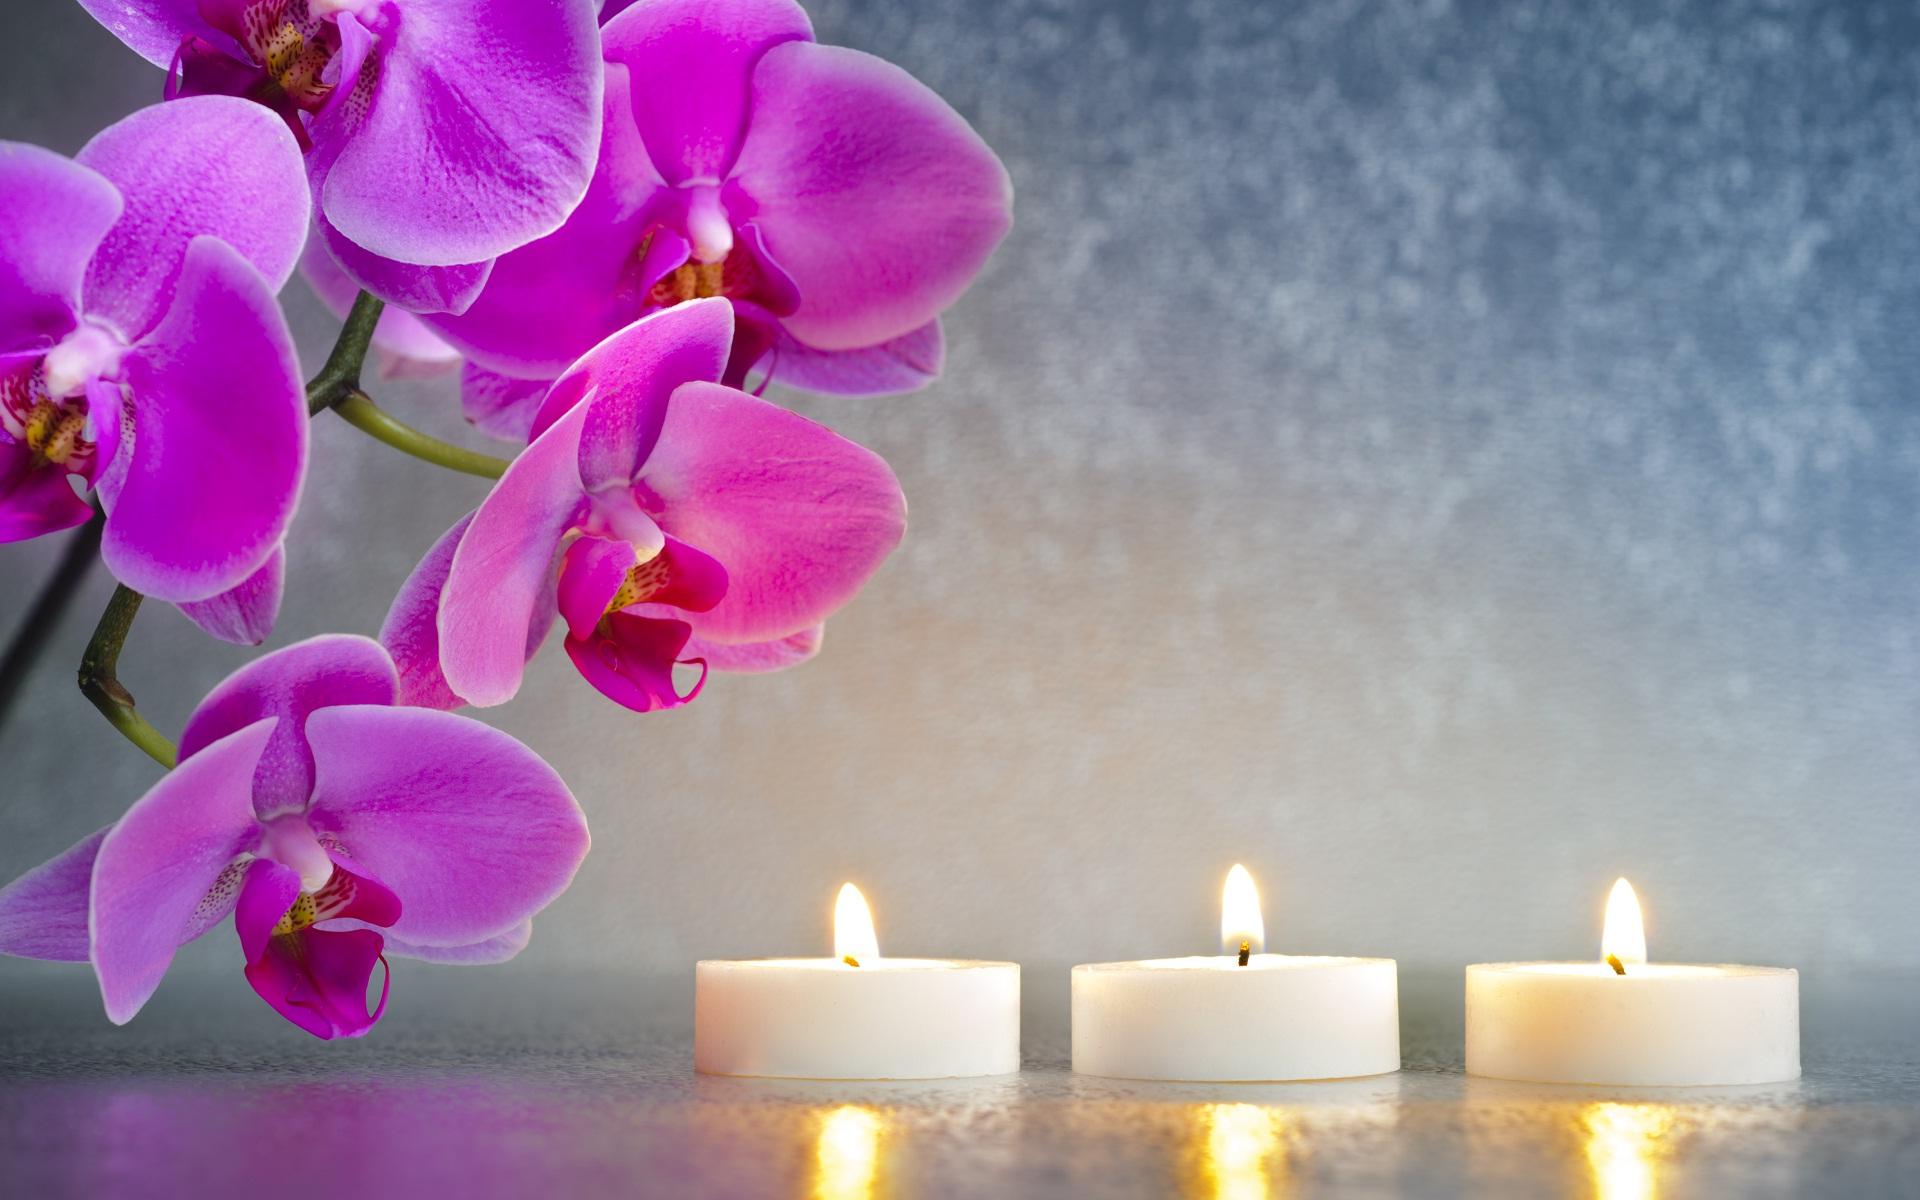 Candle light shine and purple flowers Ritual Wallpaper1920 × 1200